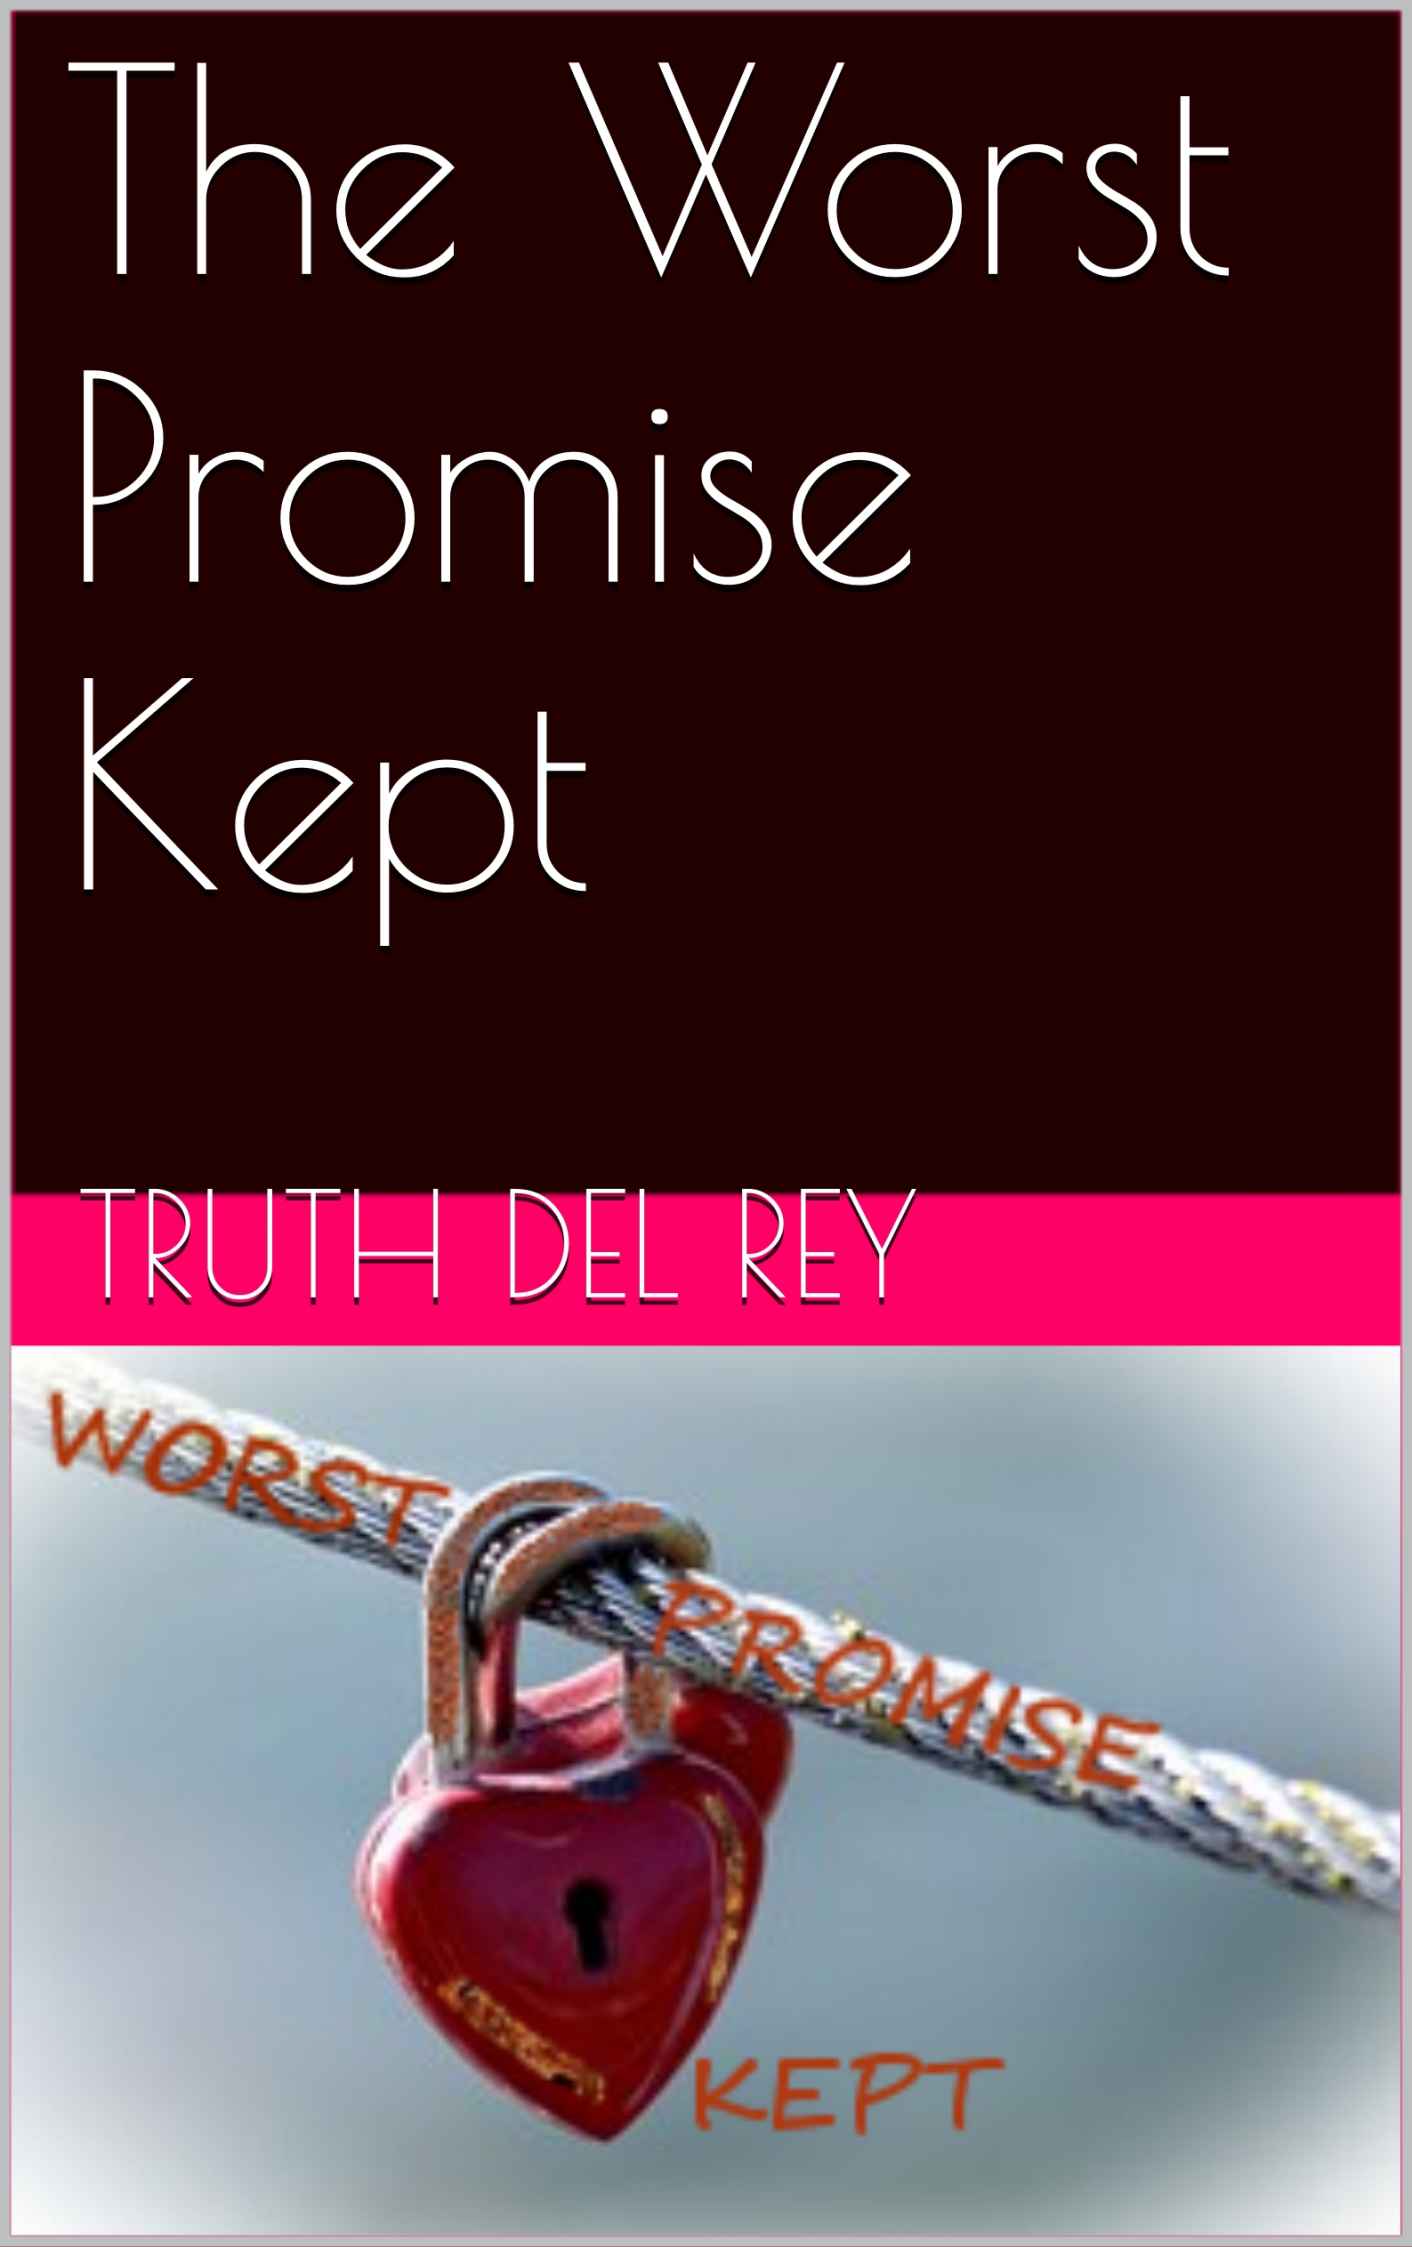 FREE: The Worst Promise Kept by Truth del Rey